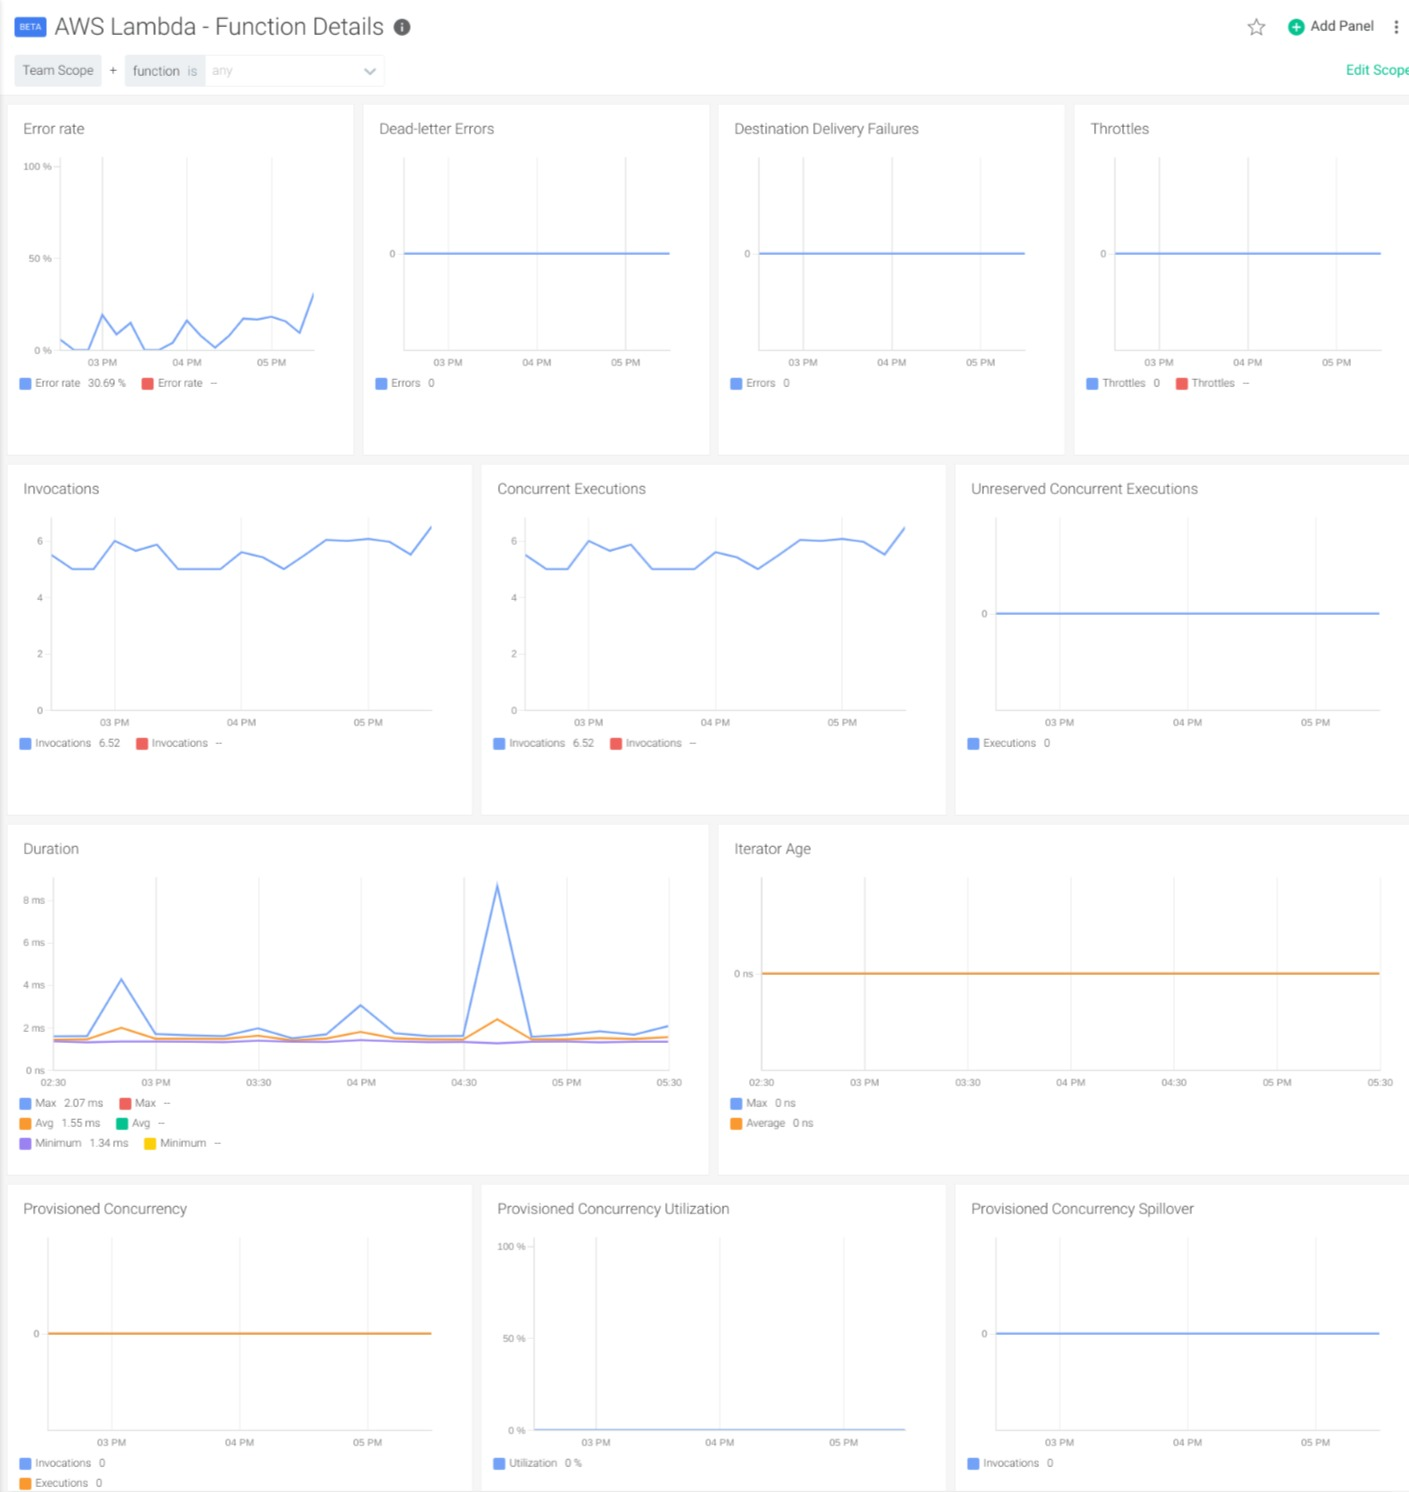 Dashboard to monitor AWS lambda function details, containing panels like "Error rate", "Throttles", "Invocations" or "Duration"